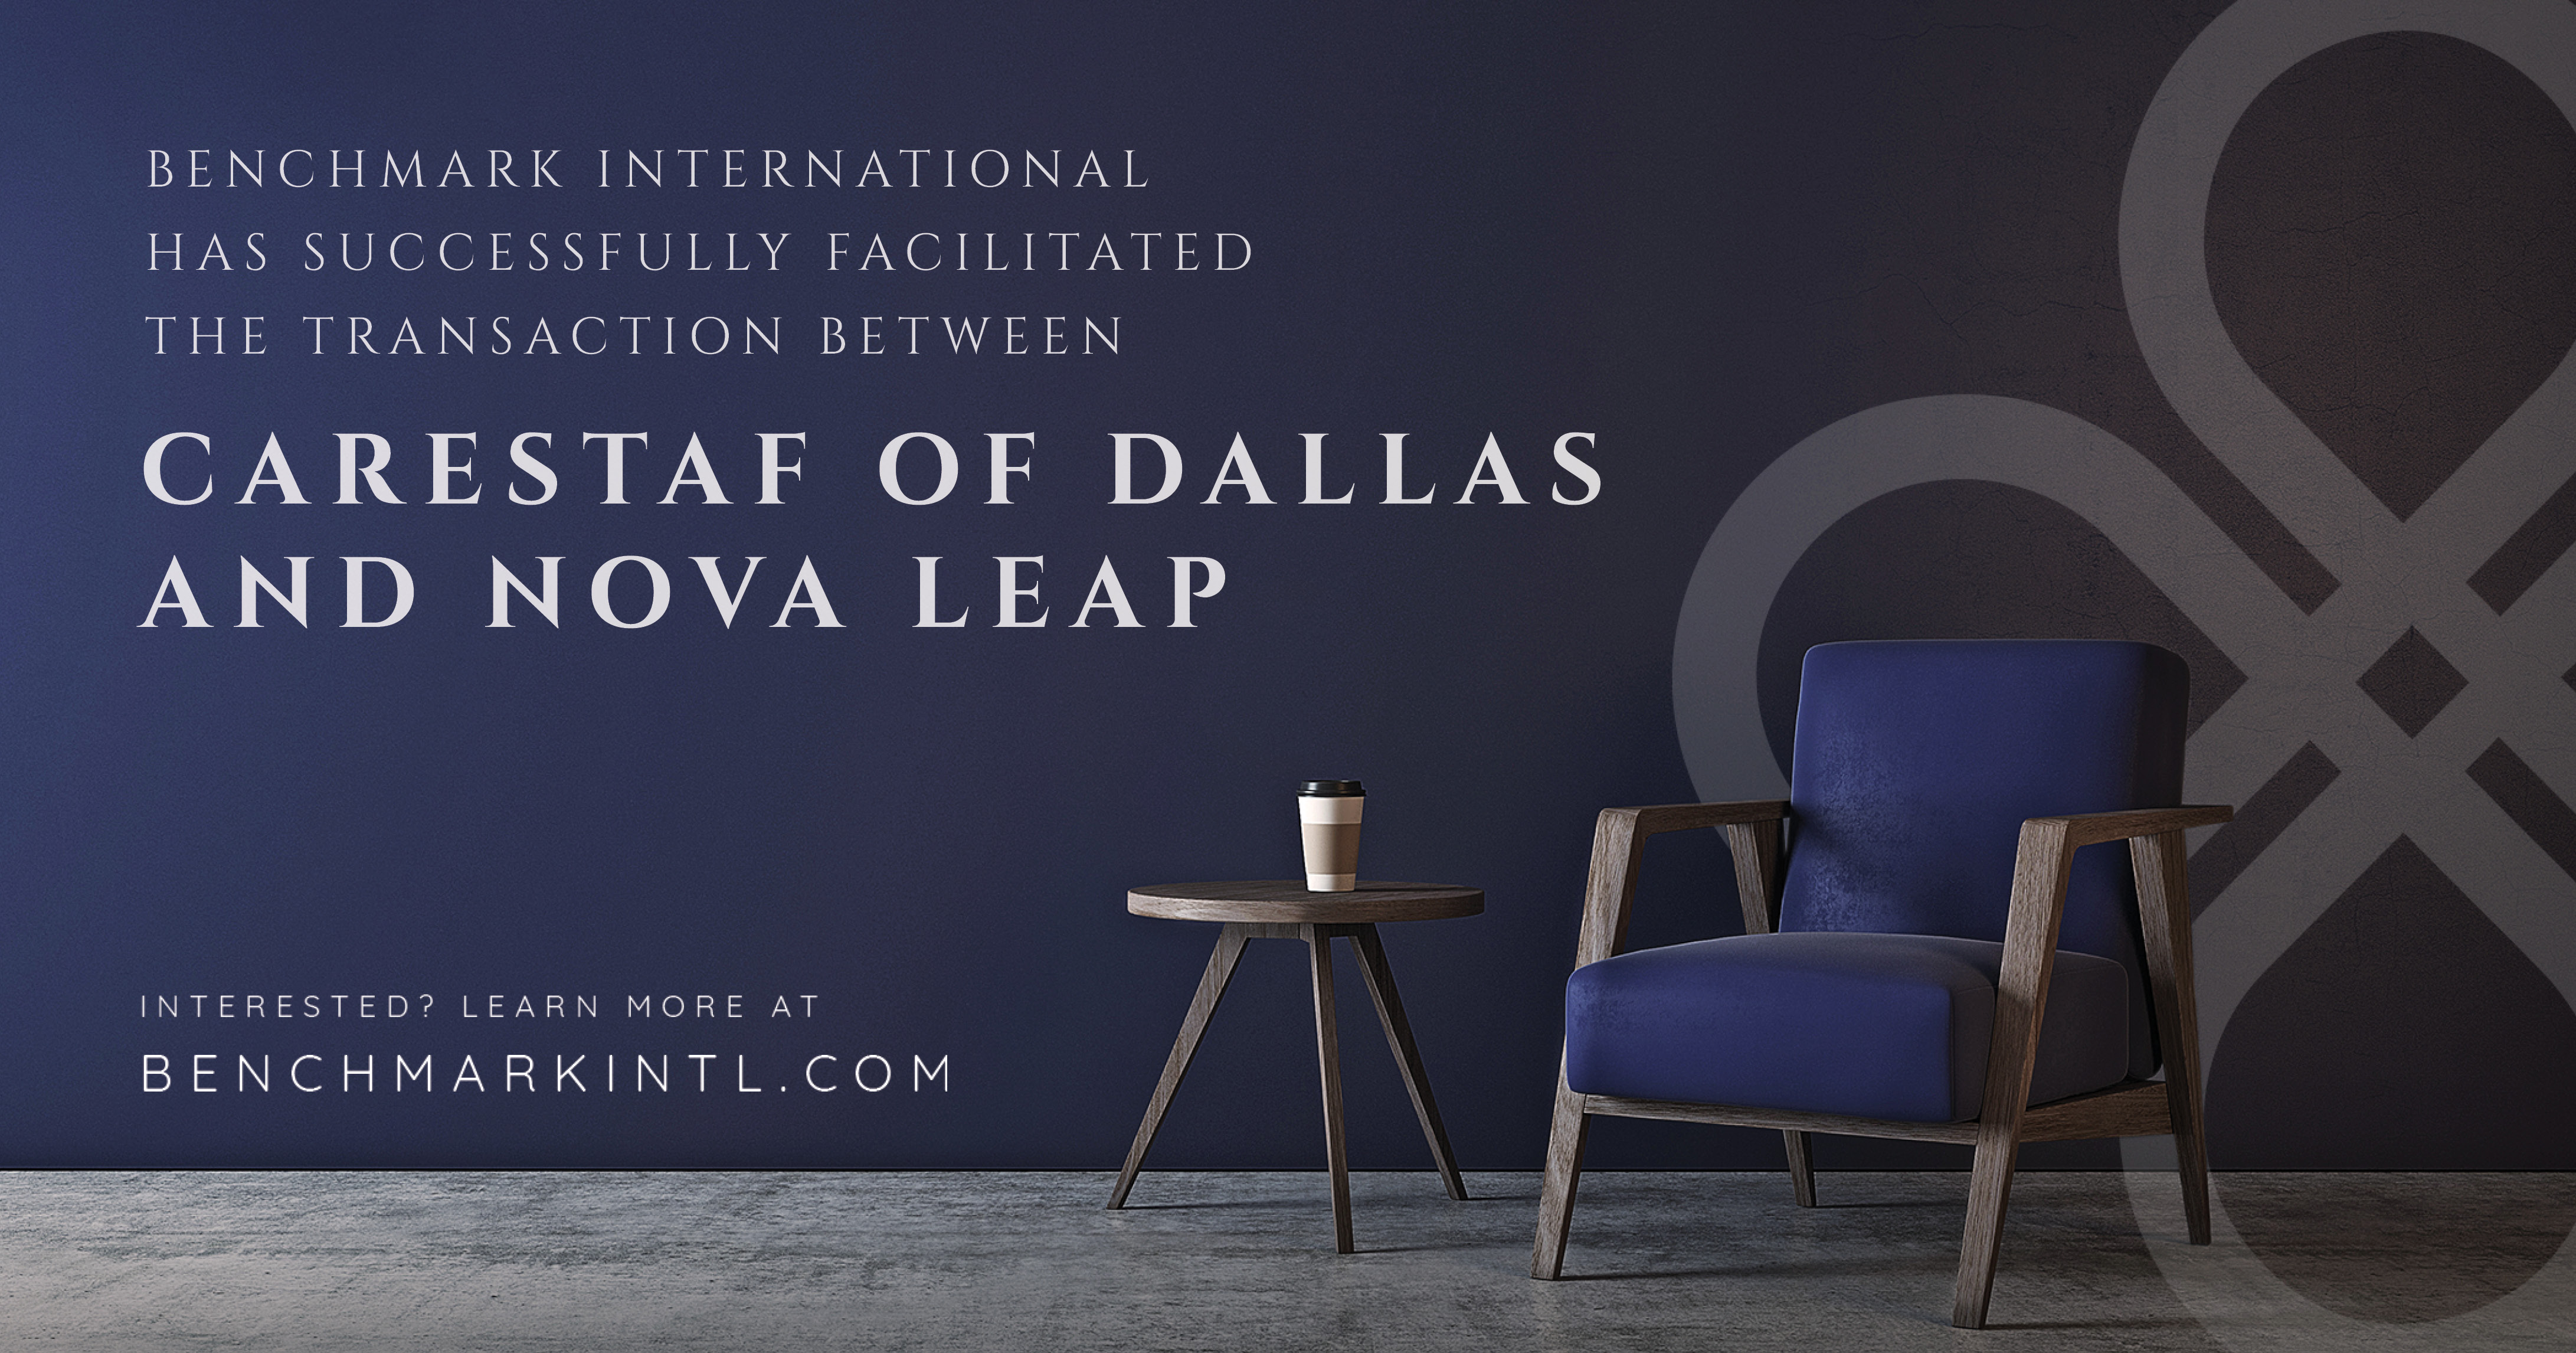 Benchmark International Successfully Facilitated the Transaction Between Carestaf of Dallas and Nova Leap